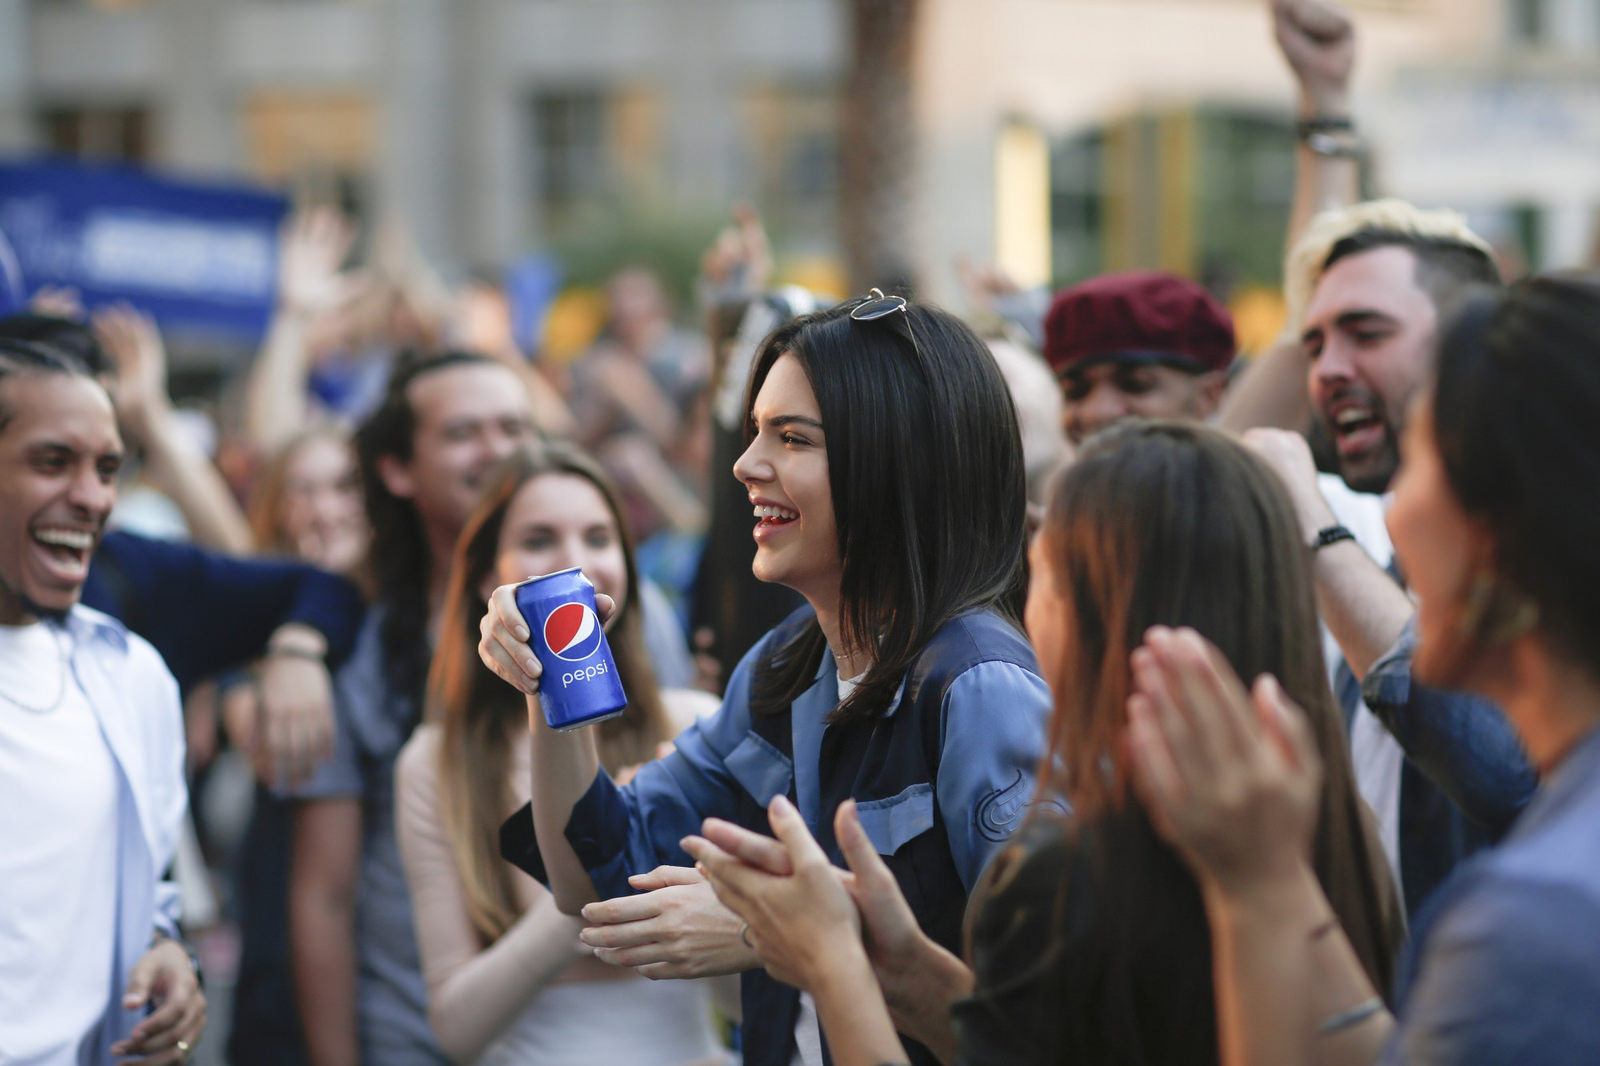 Pepsi Image in Crowd